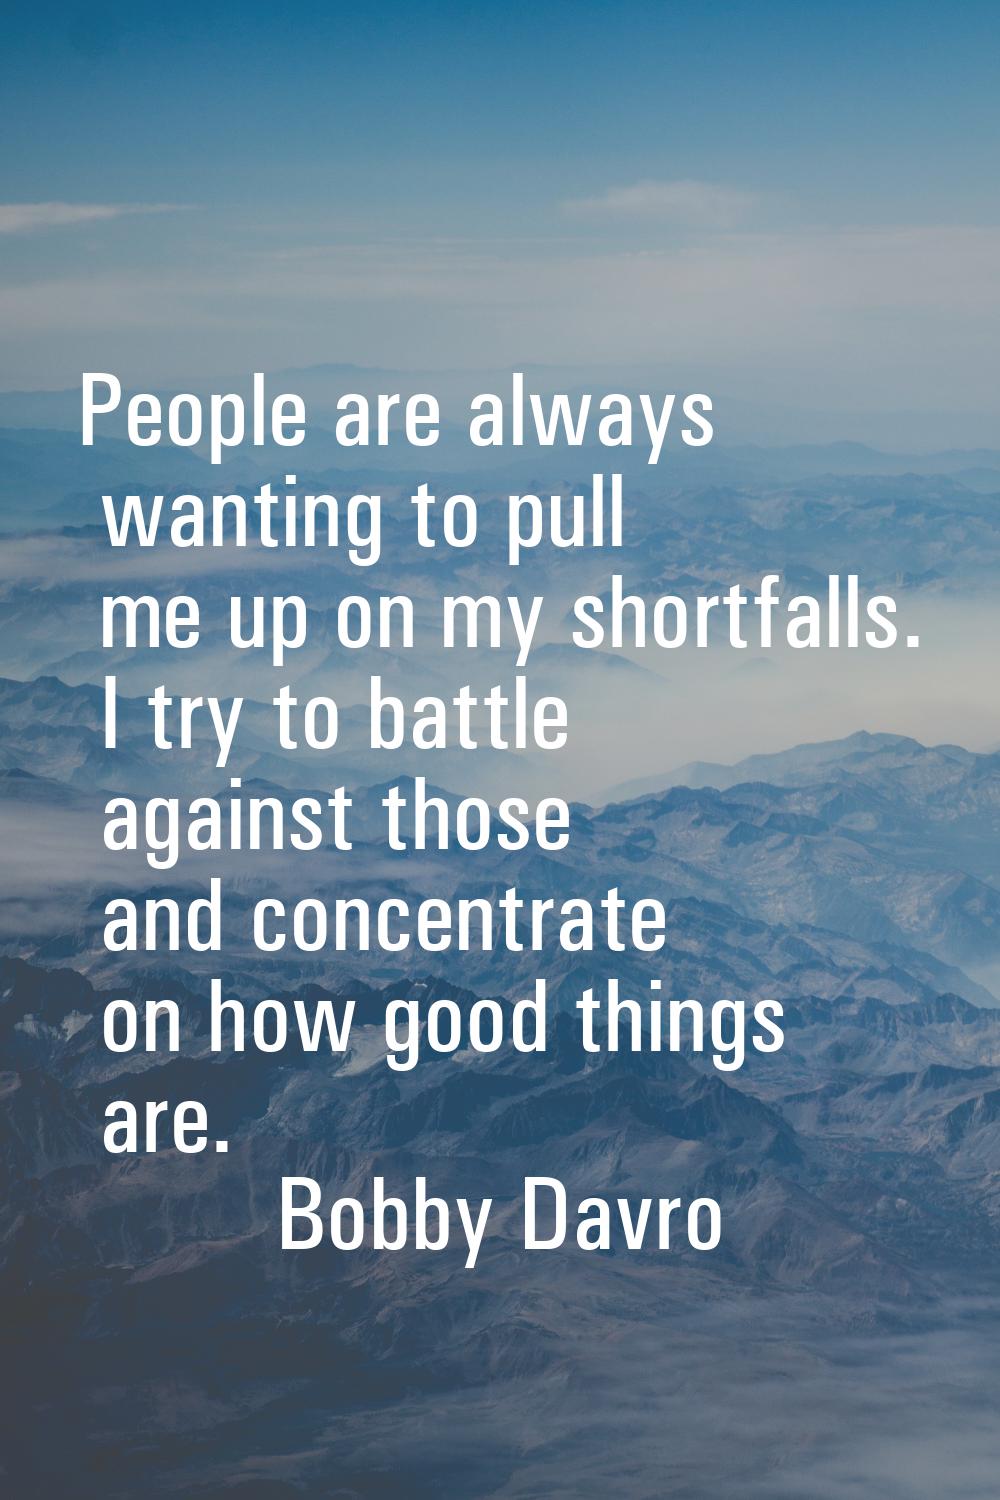 People are always wanting to pull me up on my shortfalls. I try to battle against those and concent